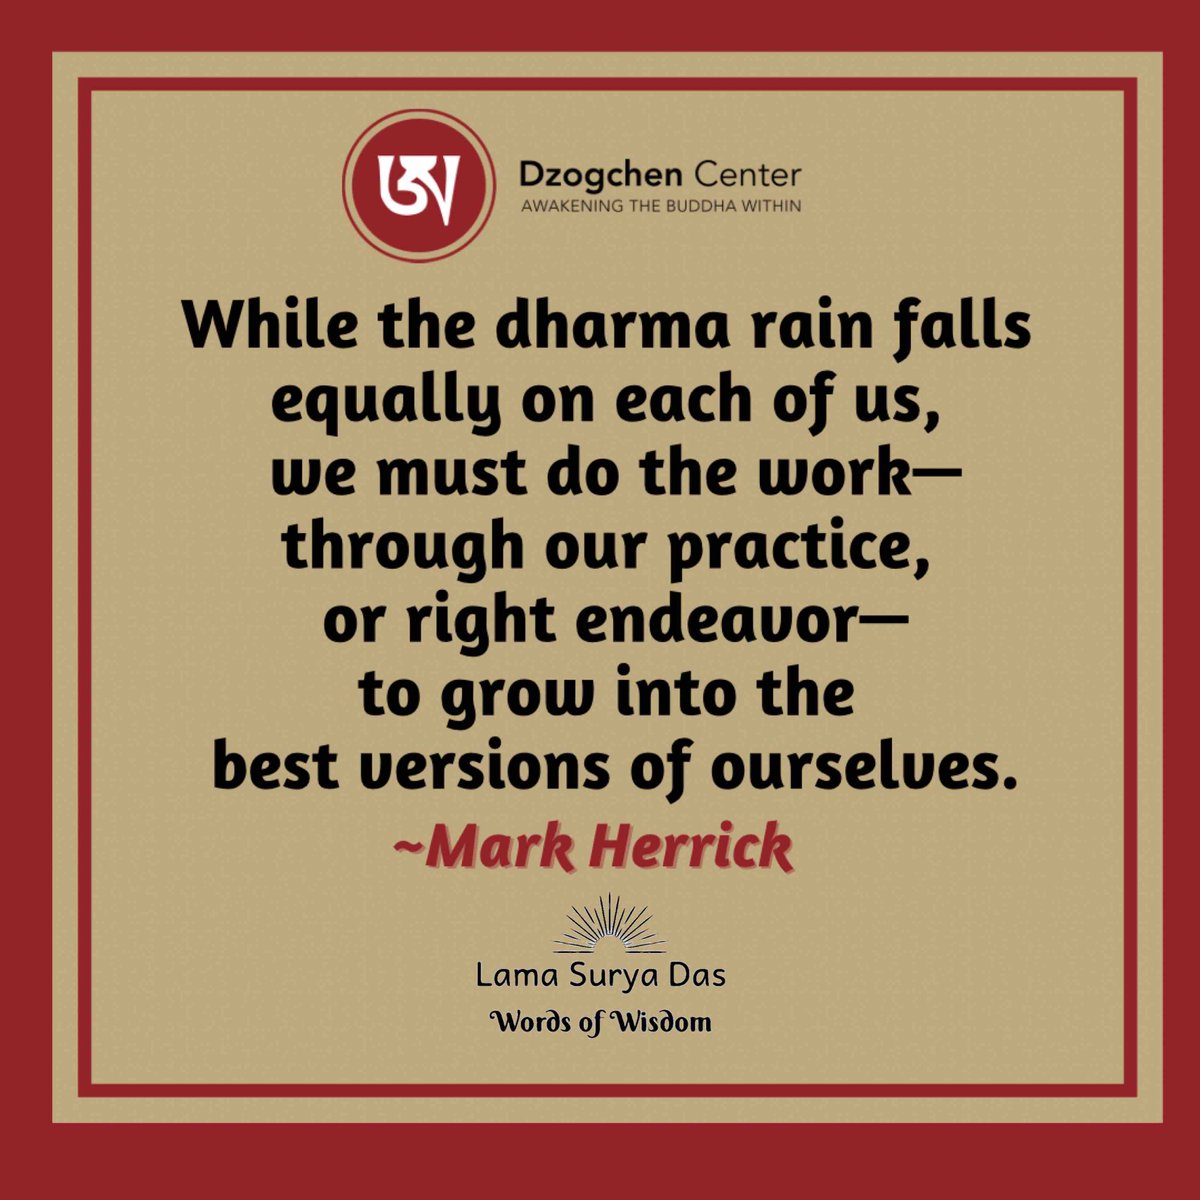 Enjoy these weekly #WordsofWisdom (#WOW) & e-subscribe for weekly WOWs & events and registrations conta.cc/4aUcQIw

#LamaSuryaDas #Dzogchen #Meditation  #Mindfulness #SelfInquiry #NonDual #AwakeningtheBuddhaWithin #Healing #Awareness #Wellness #HowtoHeal #Yoga